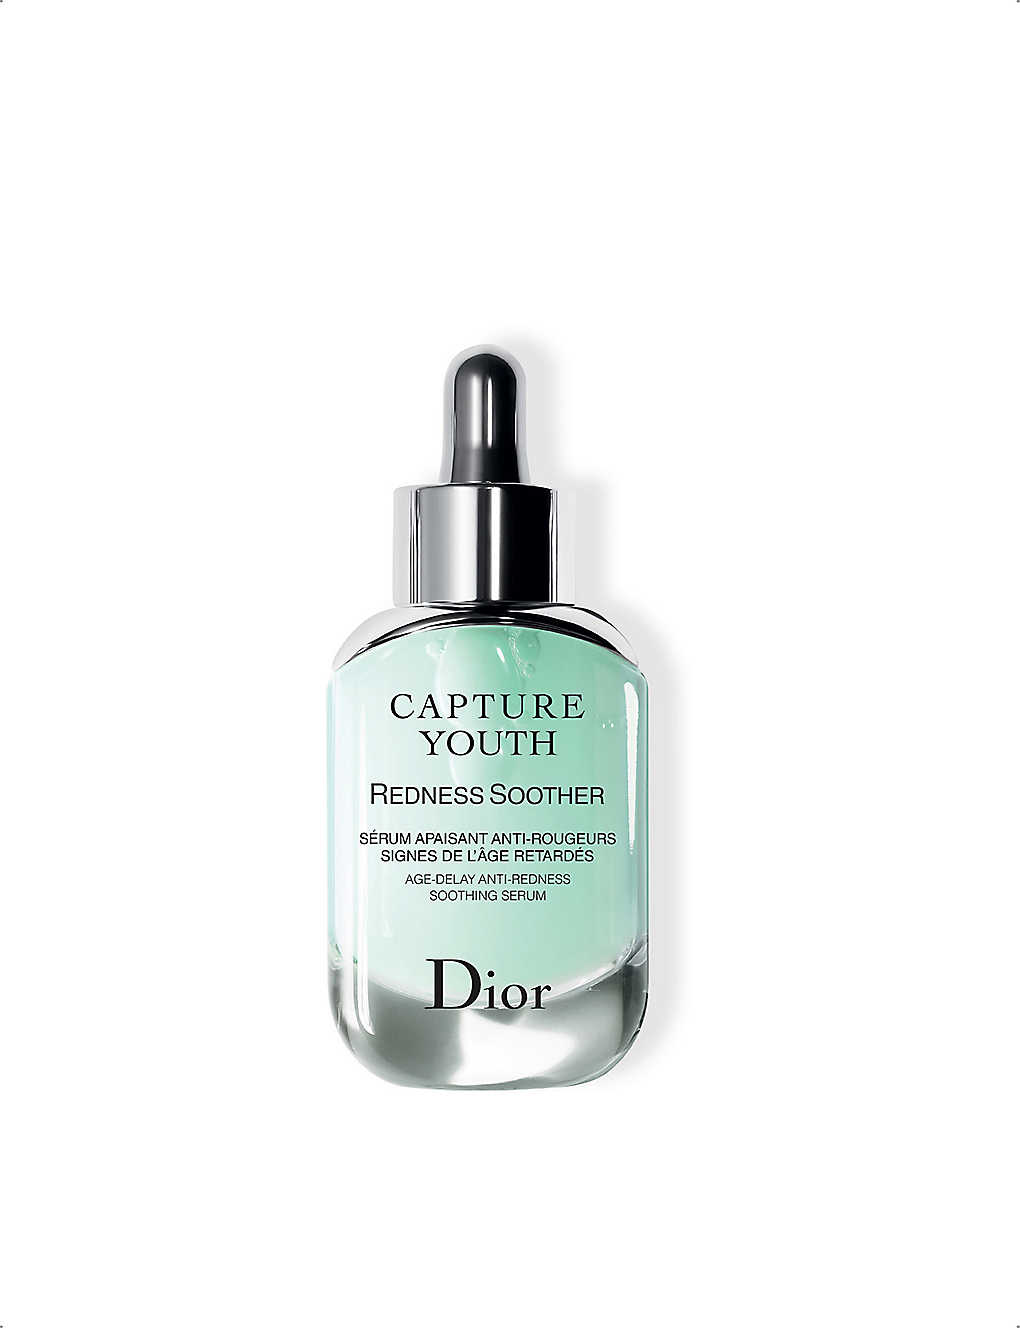 Capture Youth Redness Soother Age-delay Anti-redness Serum 30ml